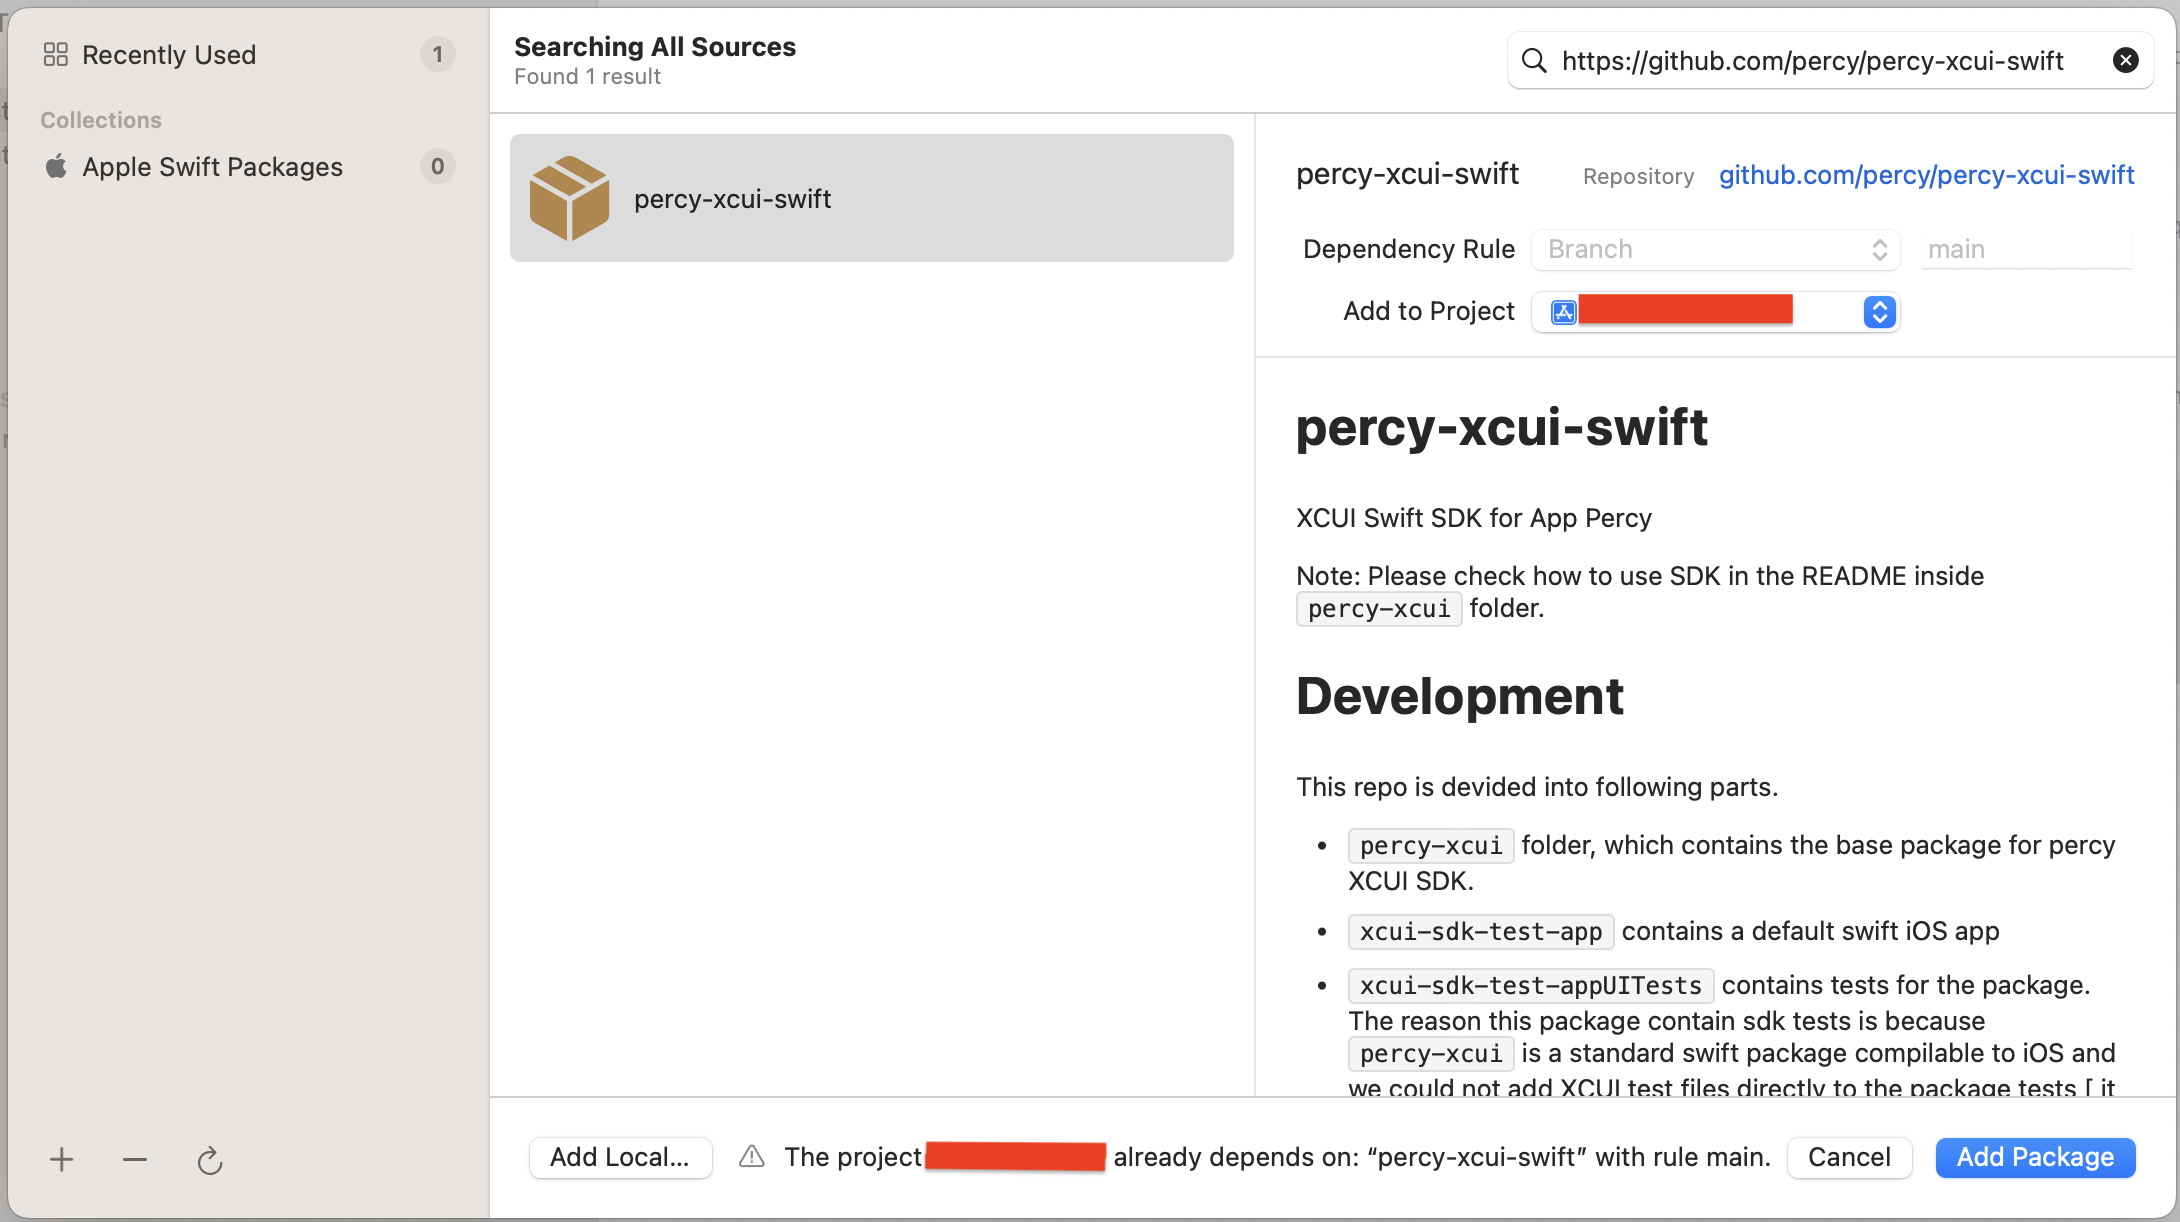 Implementation of Percy Visual Testing Tool at Halodoc iOS Apps